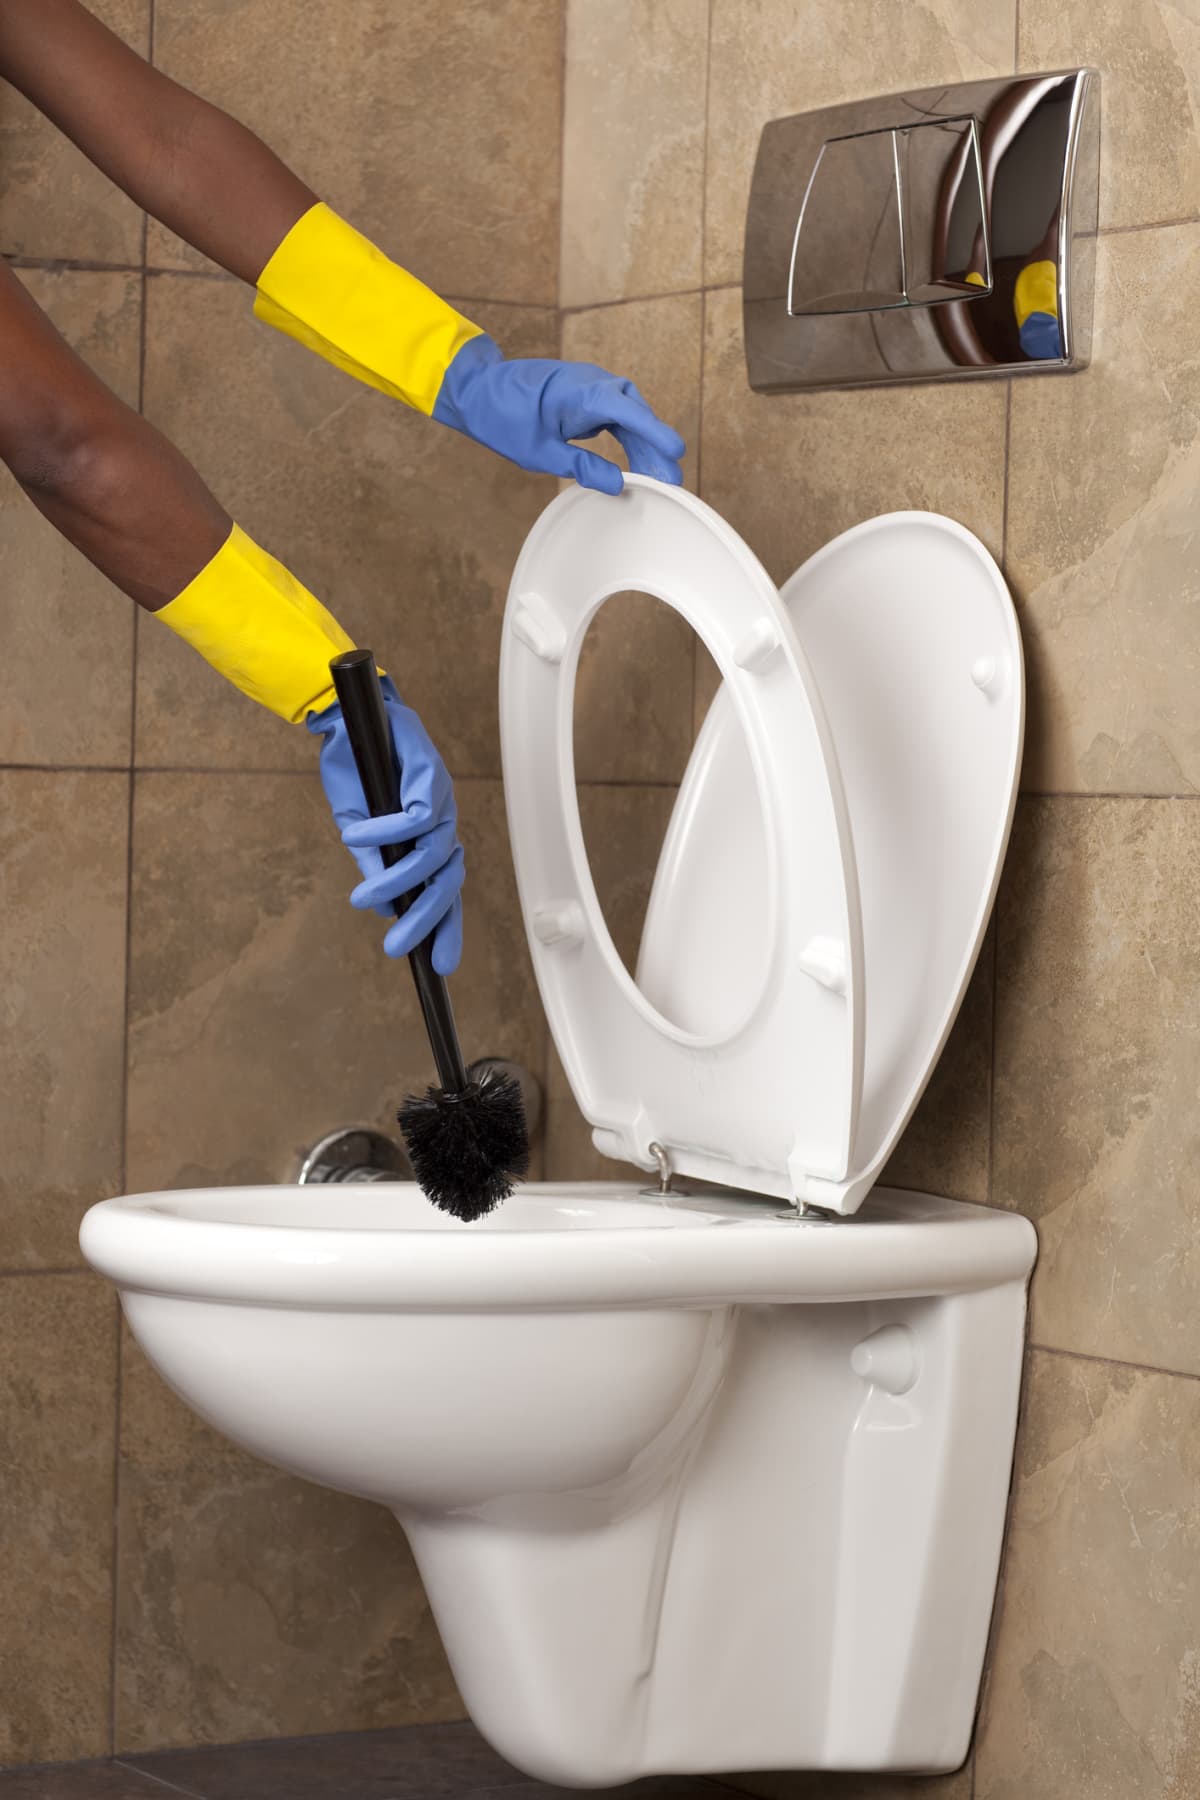 A person cleaning the toilet